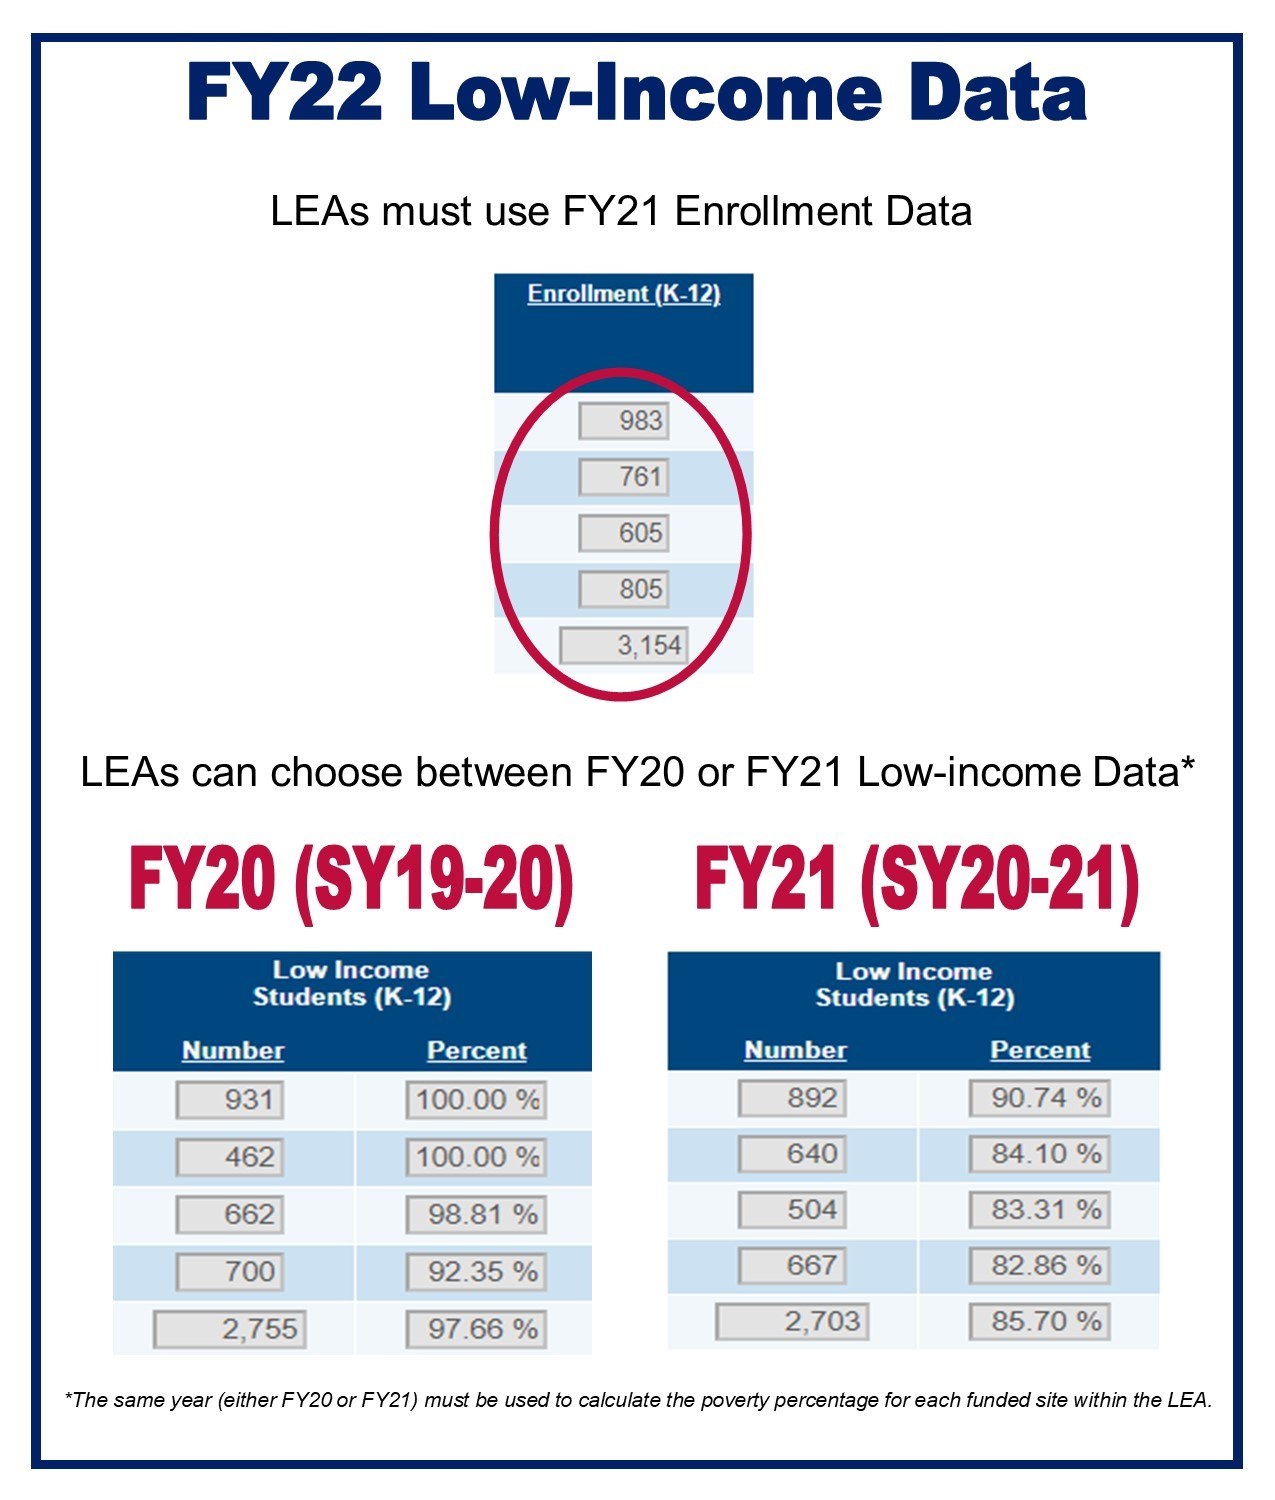 FY22 Low Income Data